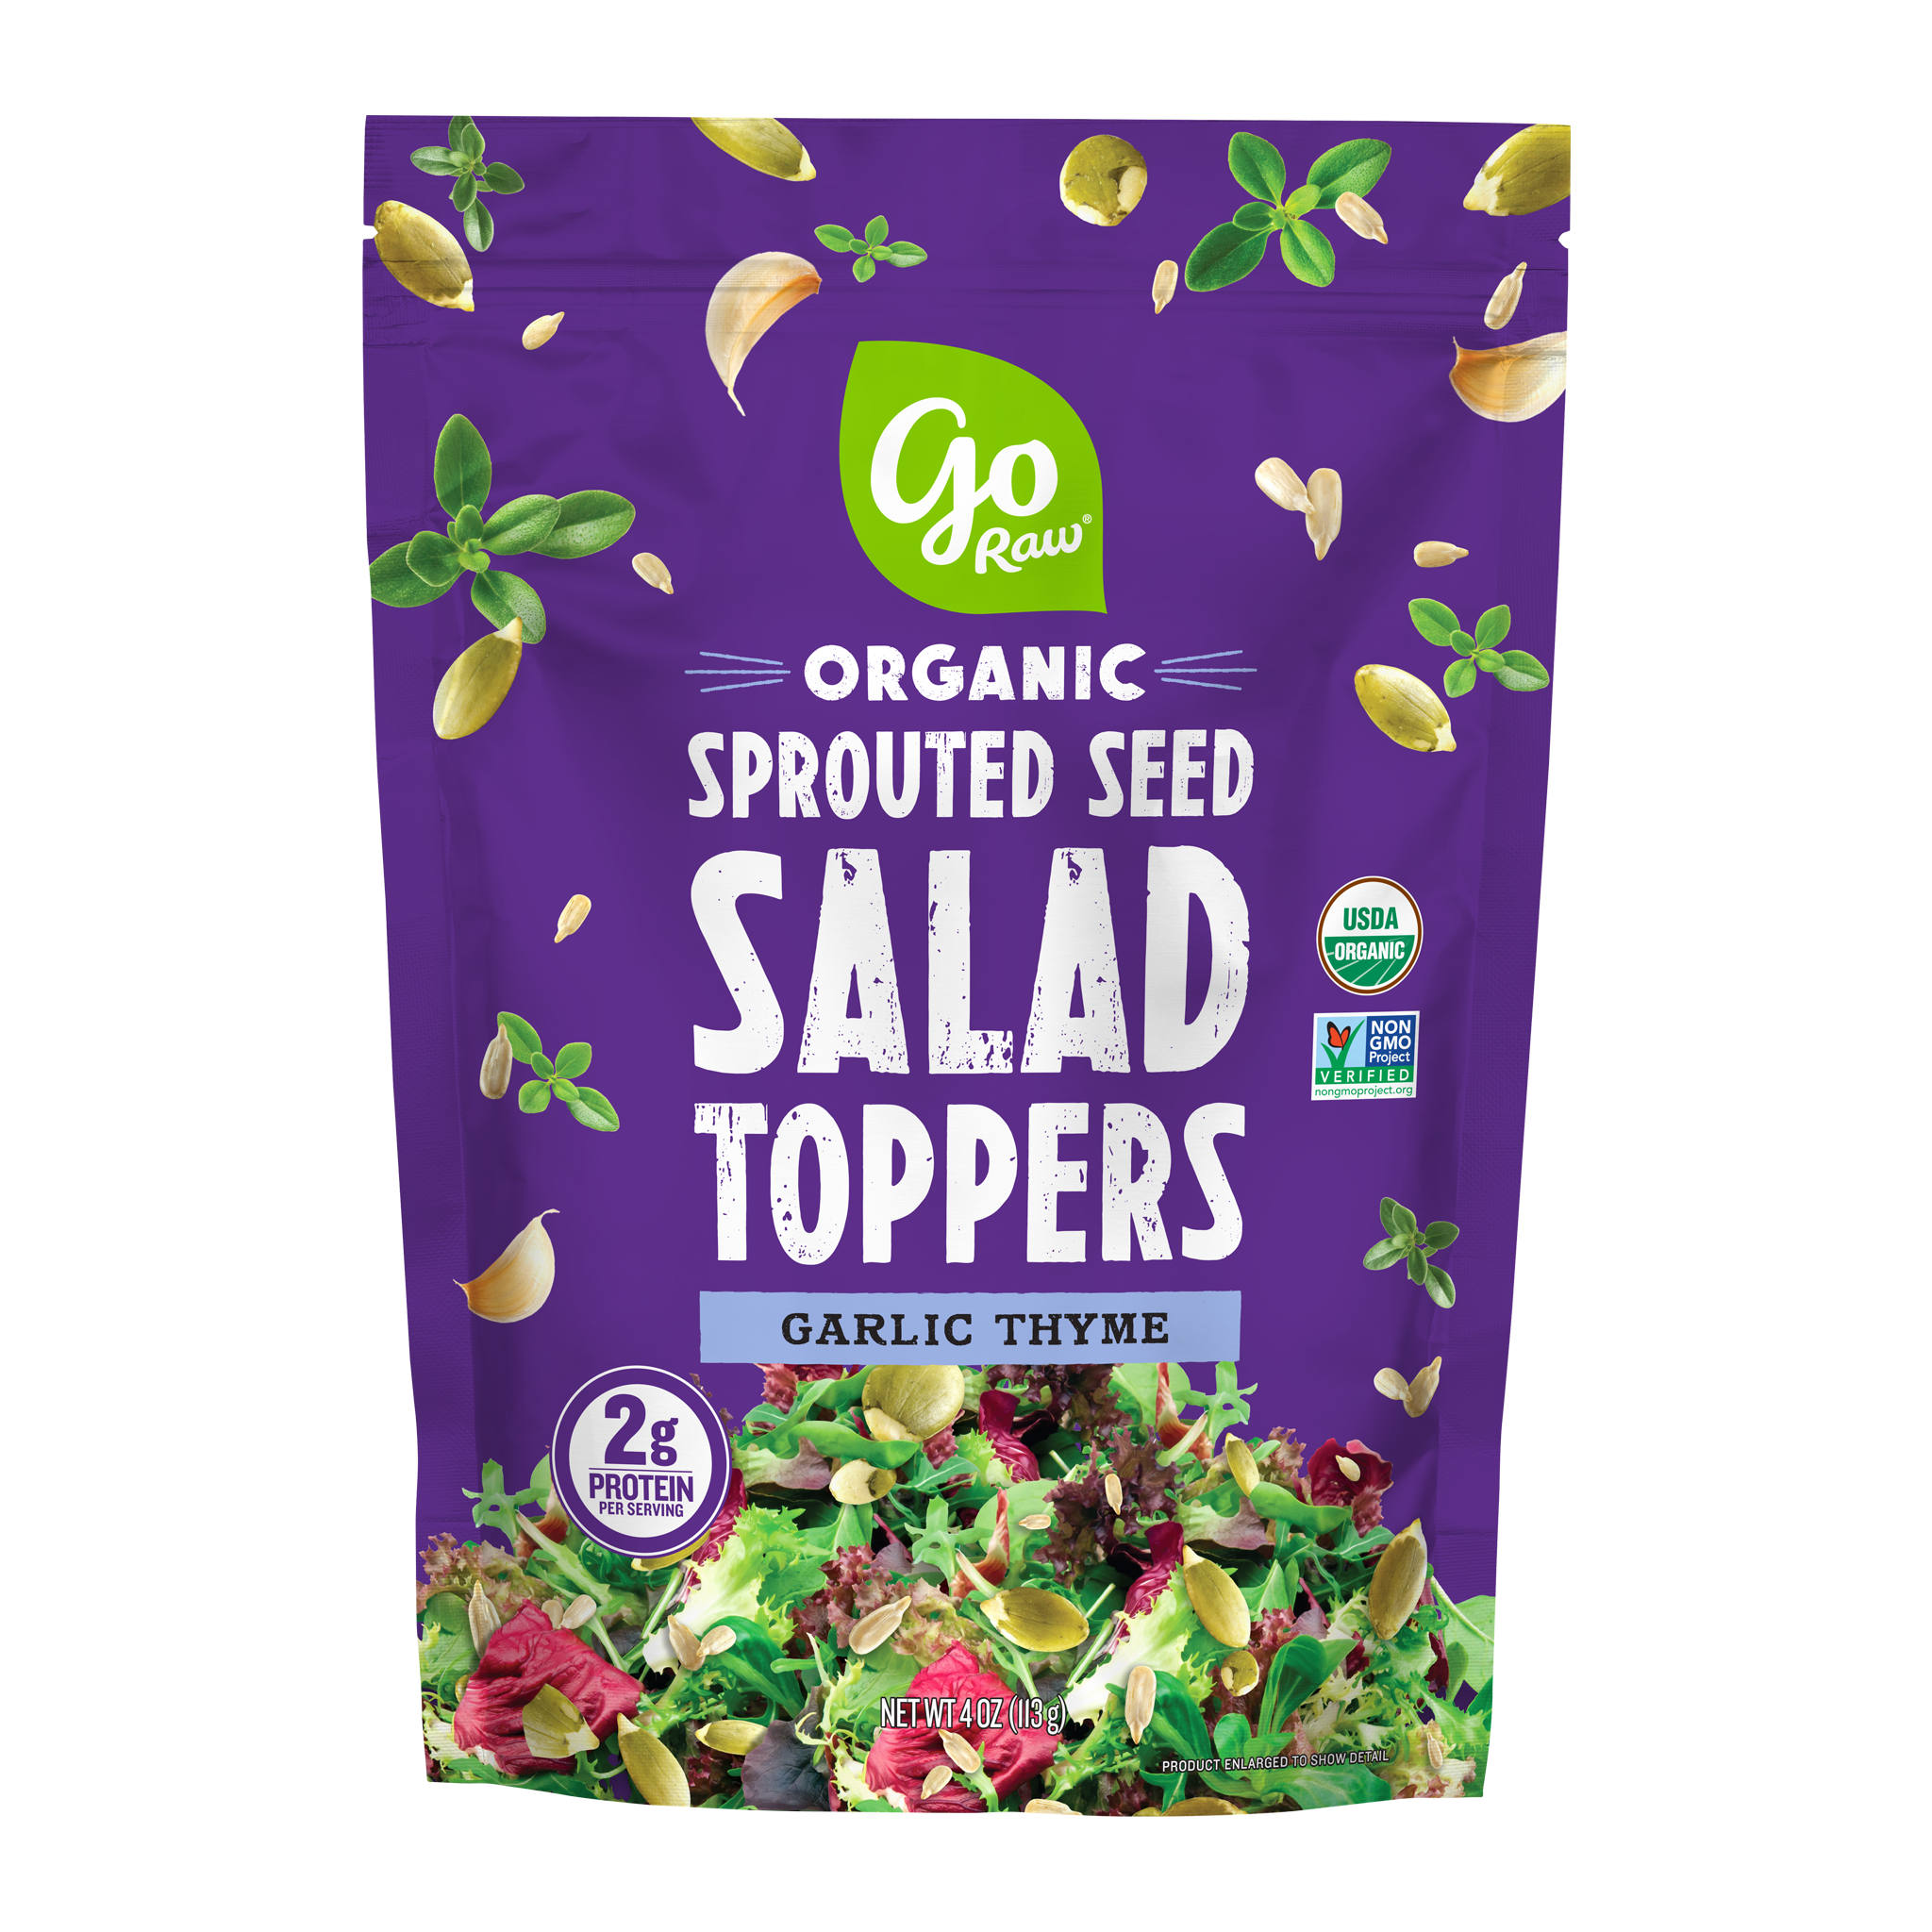 Garlic Thyme Sprouted Salad Toppers - 10 Bags, 4oz Each